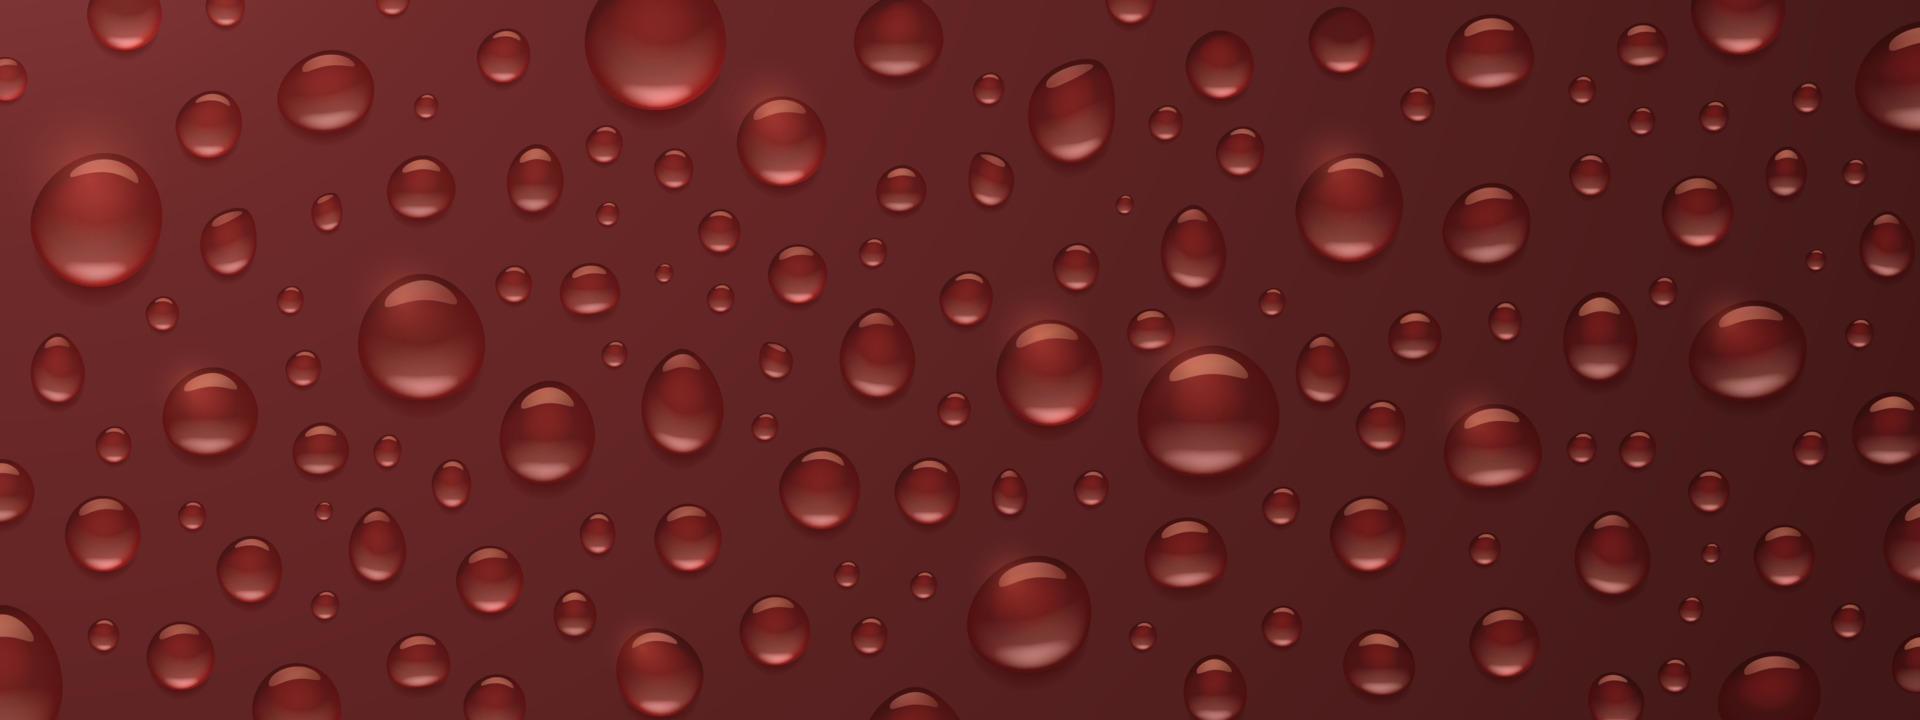 Cola, coffee, whiskey background with drop bubbles vector